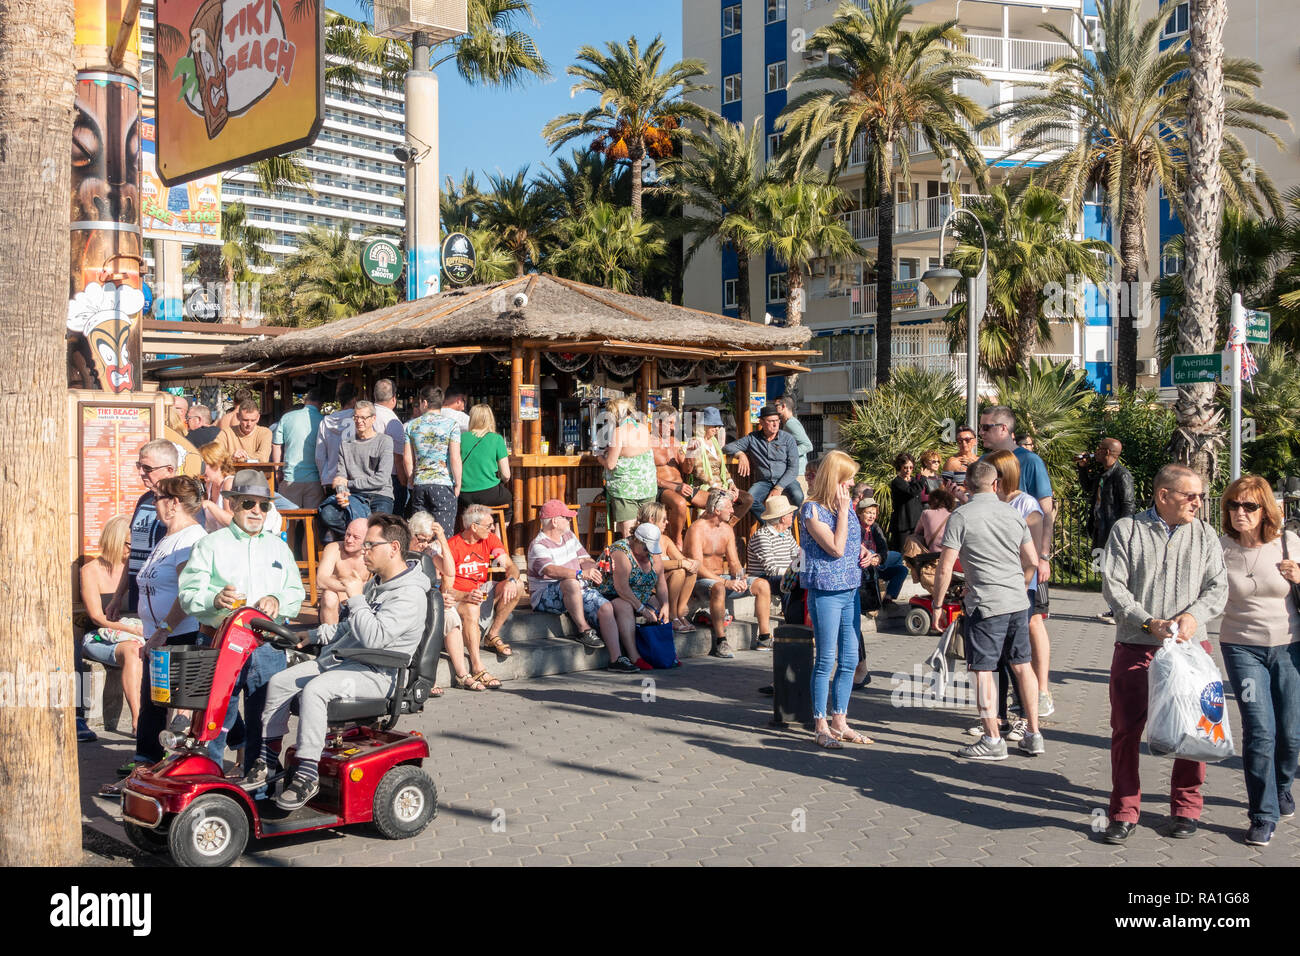 Benidorm, Spain. 30 December 2018. British tourists mix with locals on the beaches and in the bars and restaurants as they escape the cold British weather and head south to Spain. High temperatures meant that the beaches were busy from early morning with families enjoying the calm sea and temps of about 17 Celsius. Hotel occupancy is 90% for the Christmas and New Year period in this popular Spanish resort. Credit: Mick Flynn/Alamy Live News Stock Photo